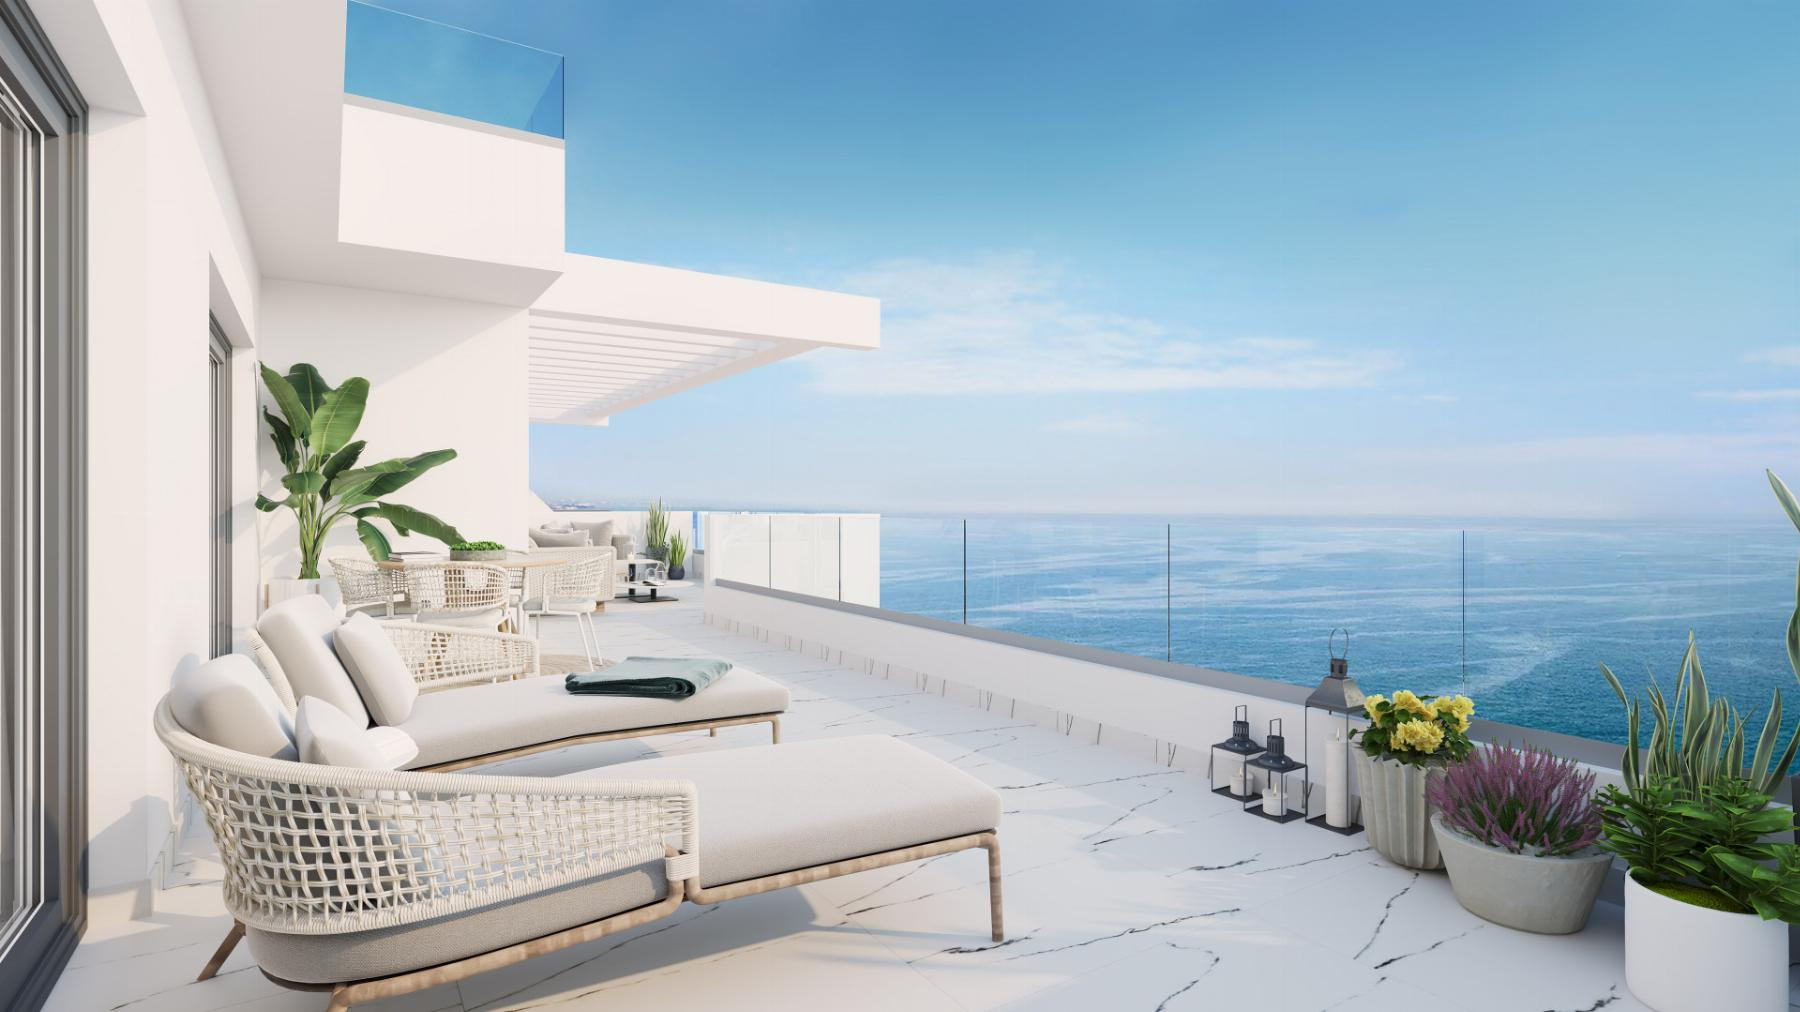 Azata Delmare: Apartments with 2 and 3 bedrooms with ocean view in Casares Costa. | Image 4